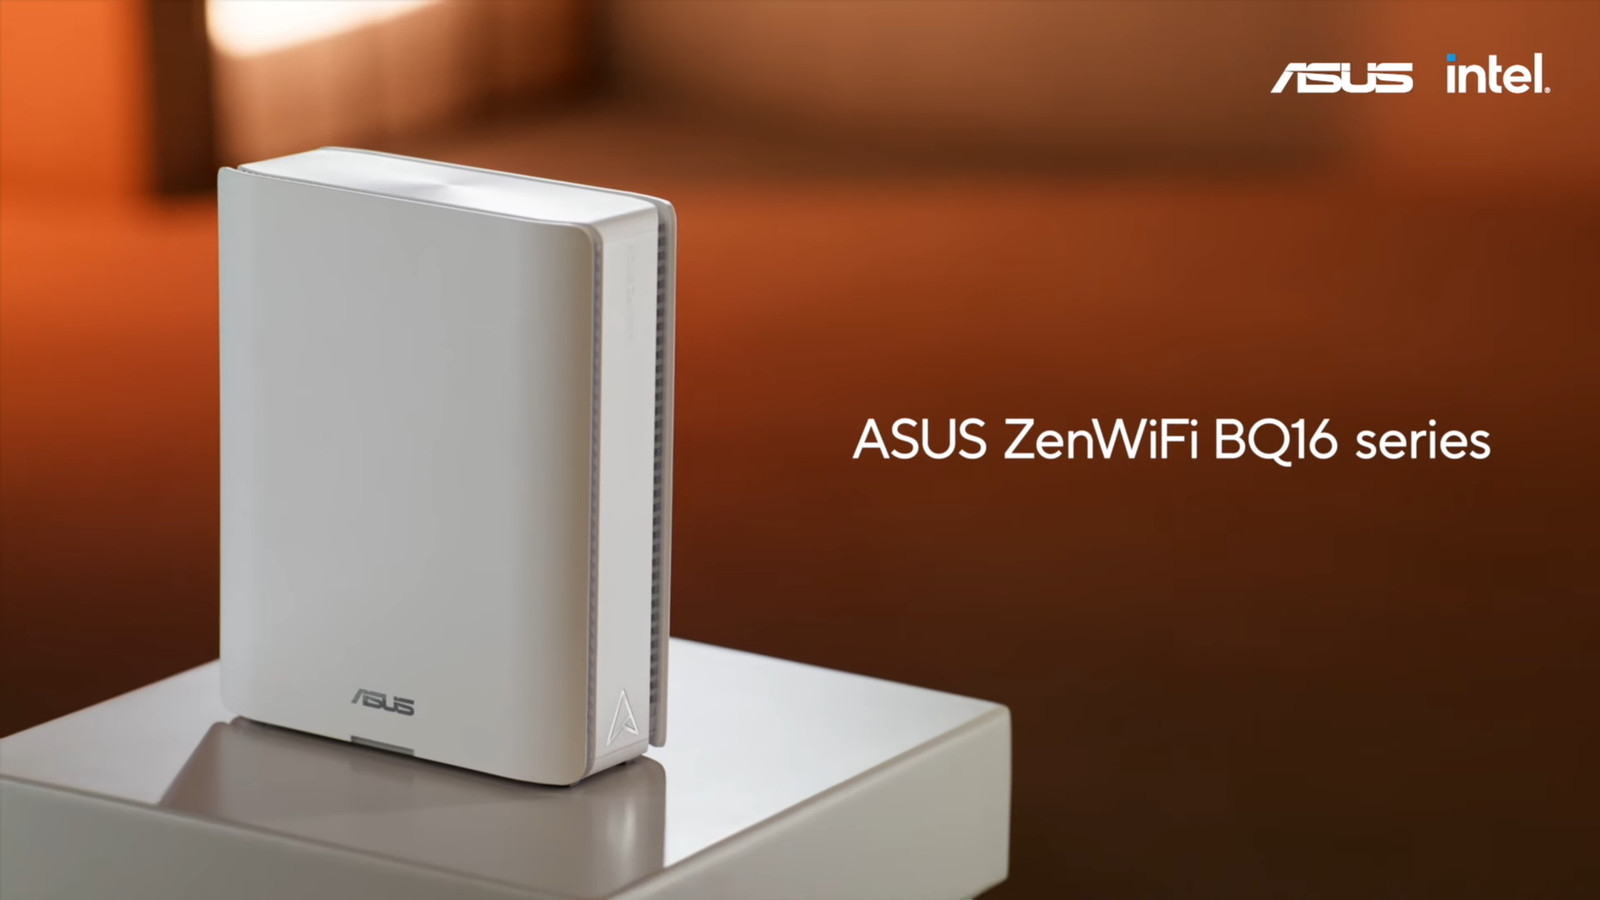 ASUS Displays ZenWiFi BQ16 and BQ16 Pro WiFi 7 Mesh Routers at CES